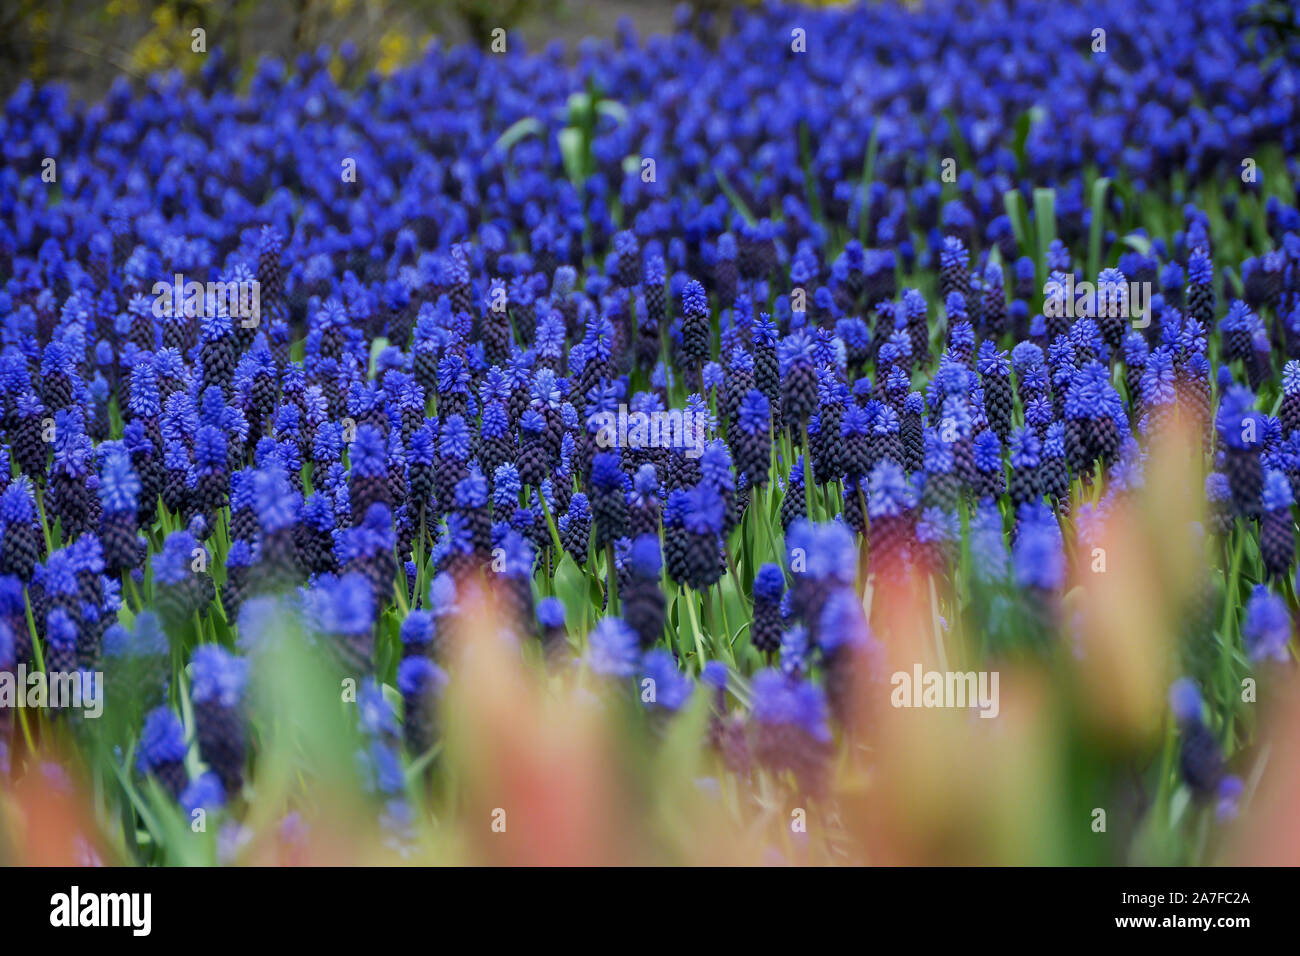 Field of vibrant blue lavender flowers in bloom. Stock Photo